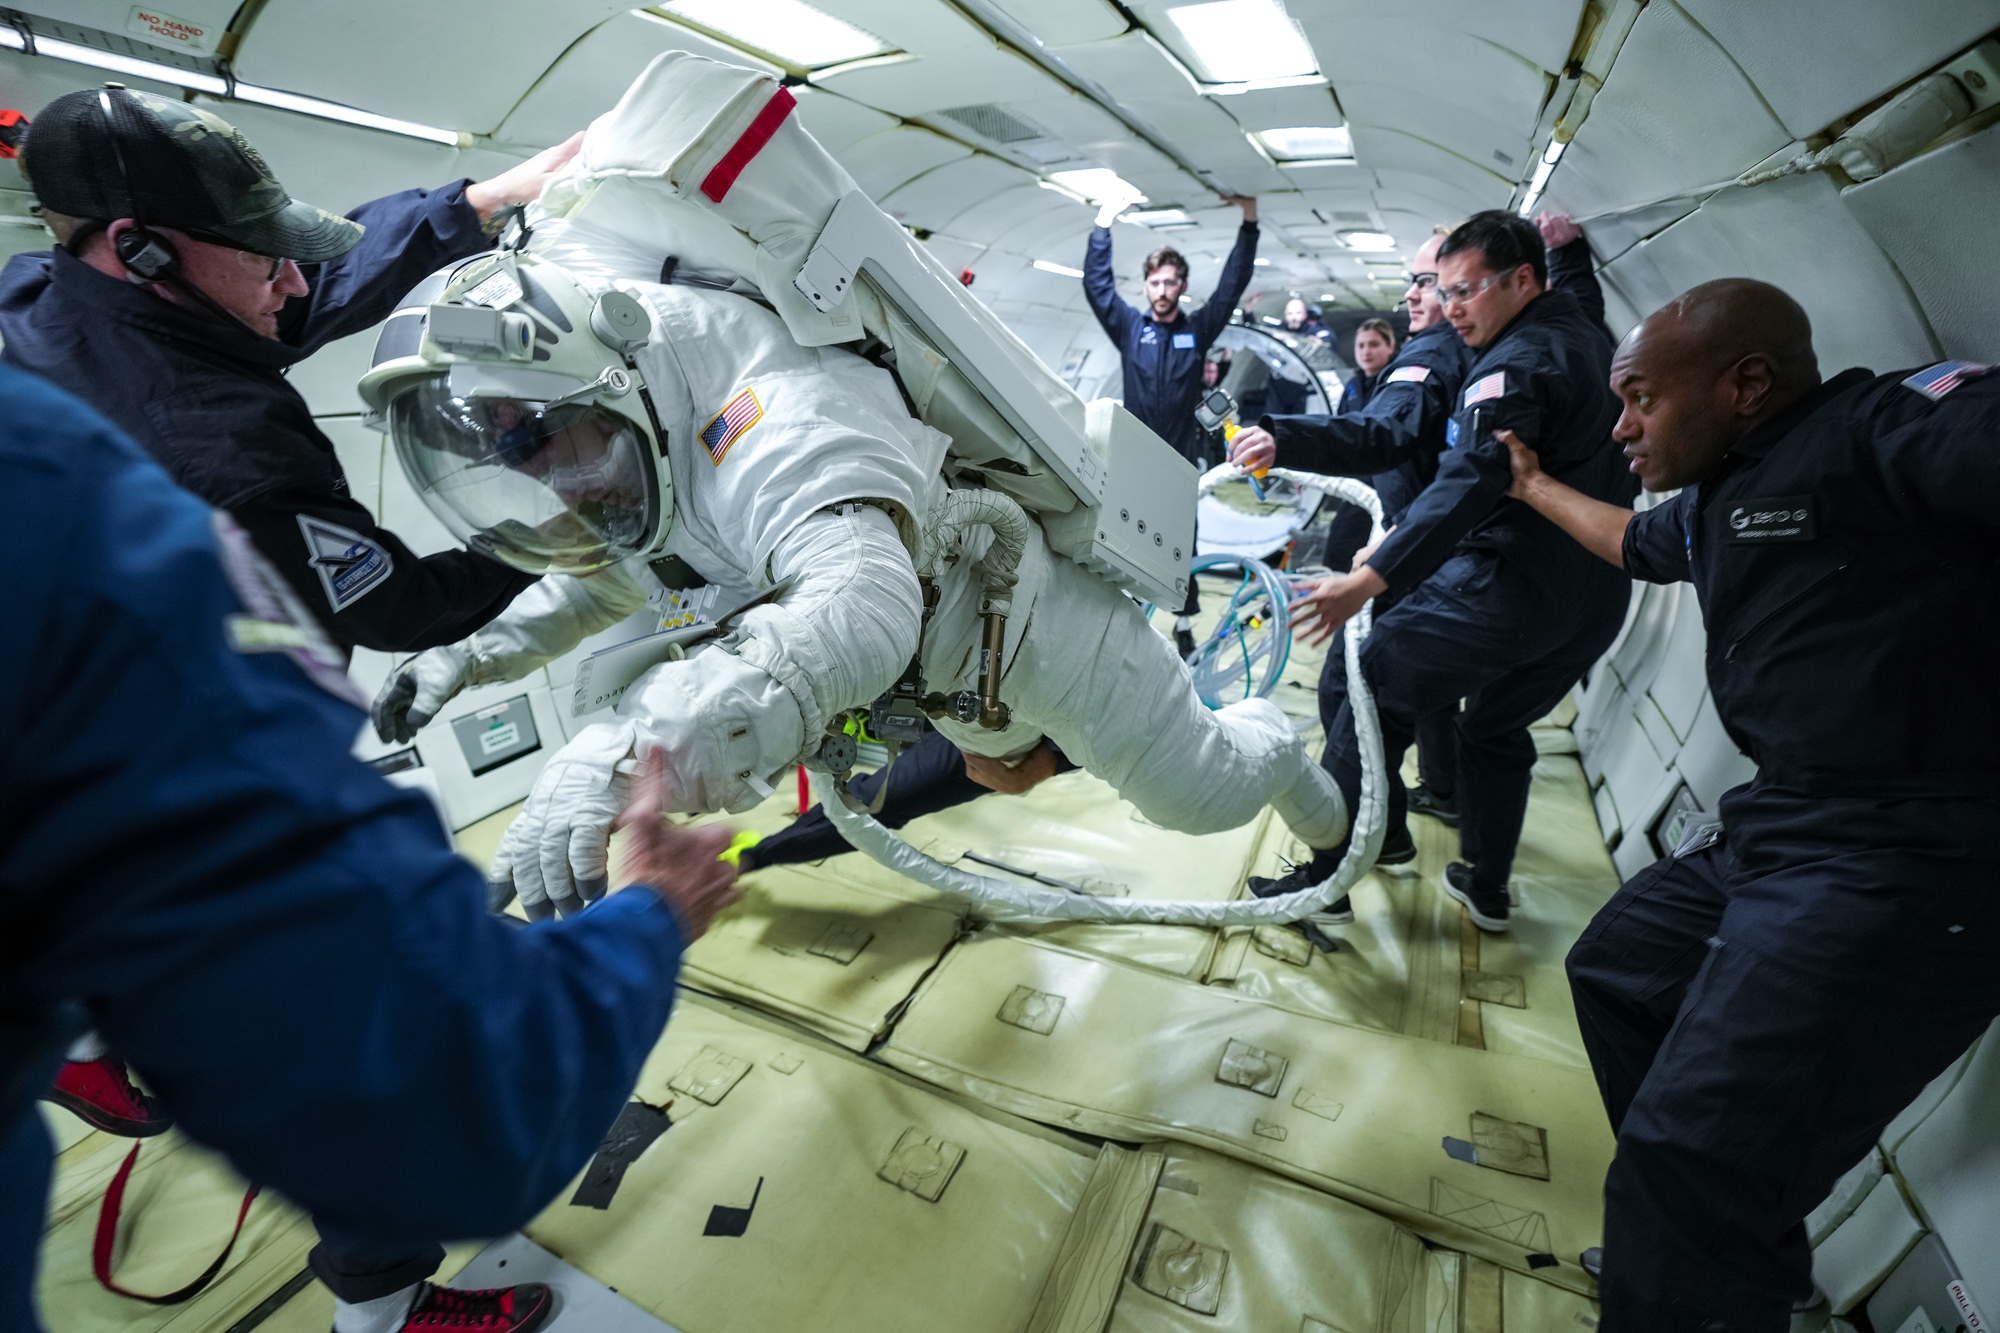 Collins conducts tests of a new space suit for the space station